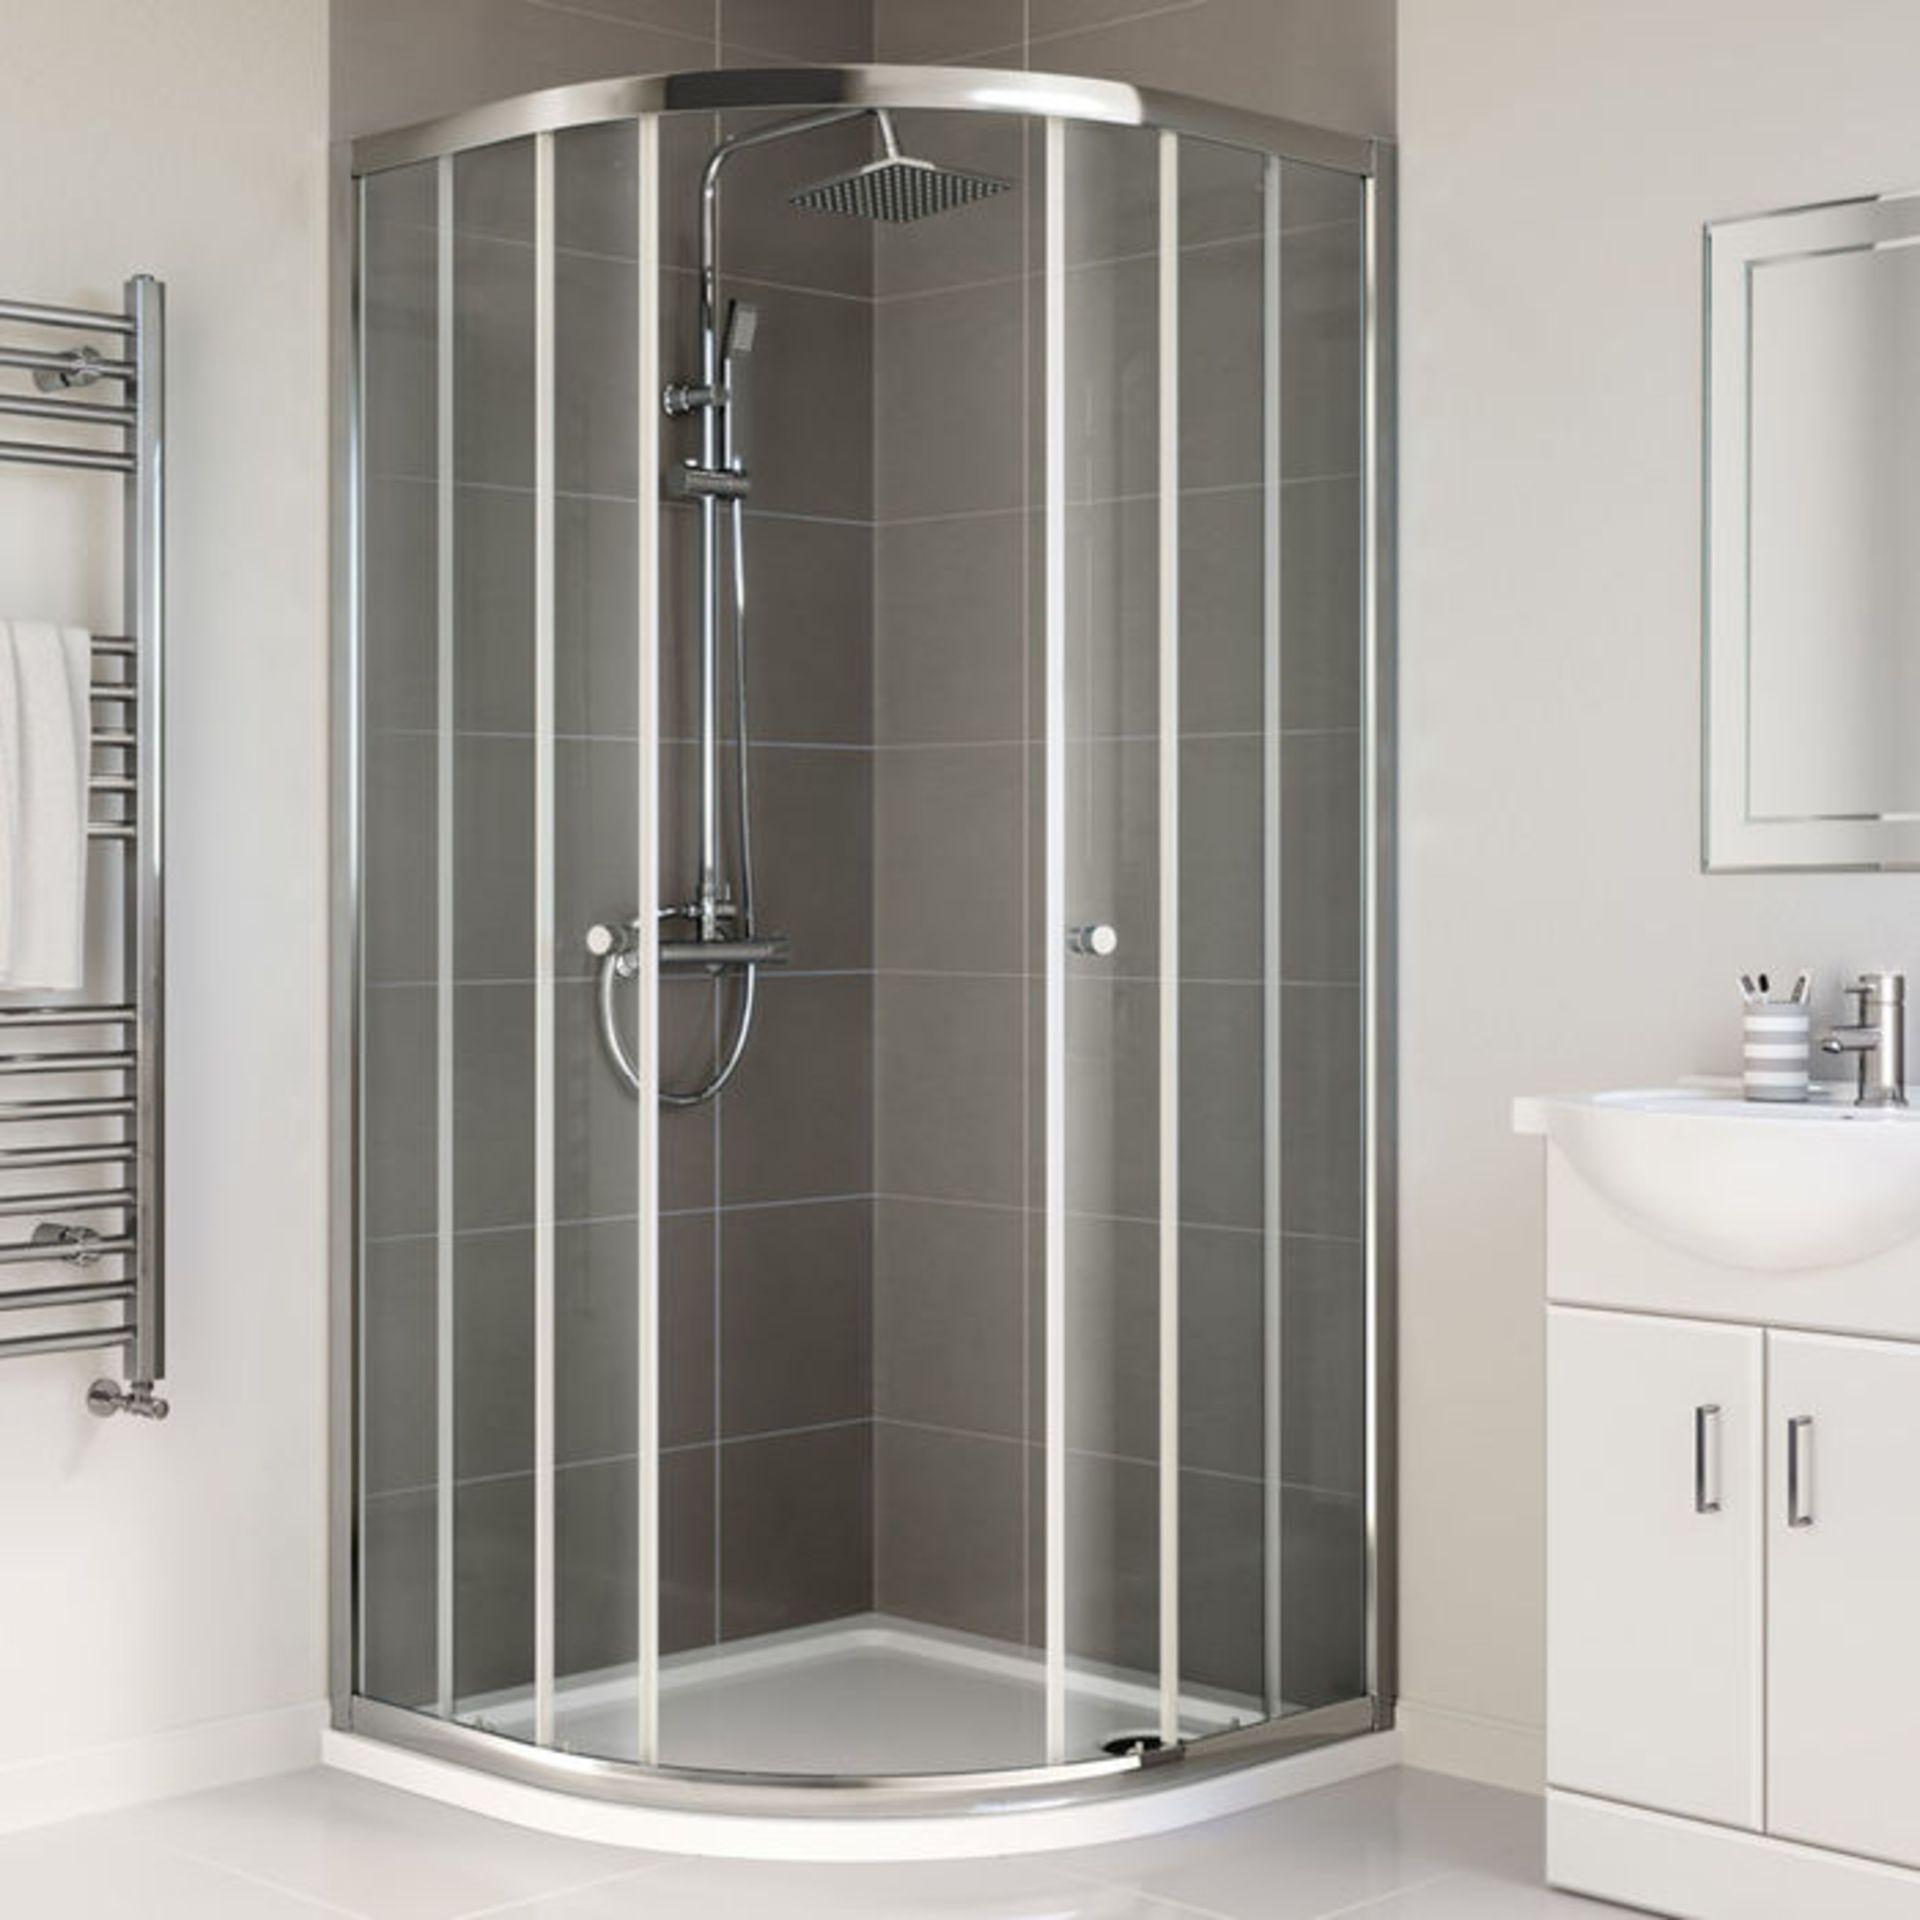 (DK262) 900x900mm - Elements Quadrant Shower Enclosure. 4mm Safety Glass Fully waterproof tested - Image 2 of 5